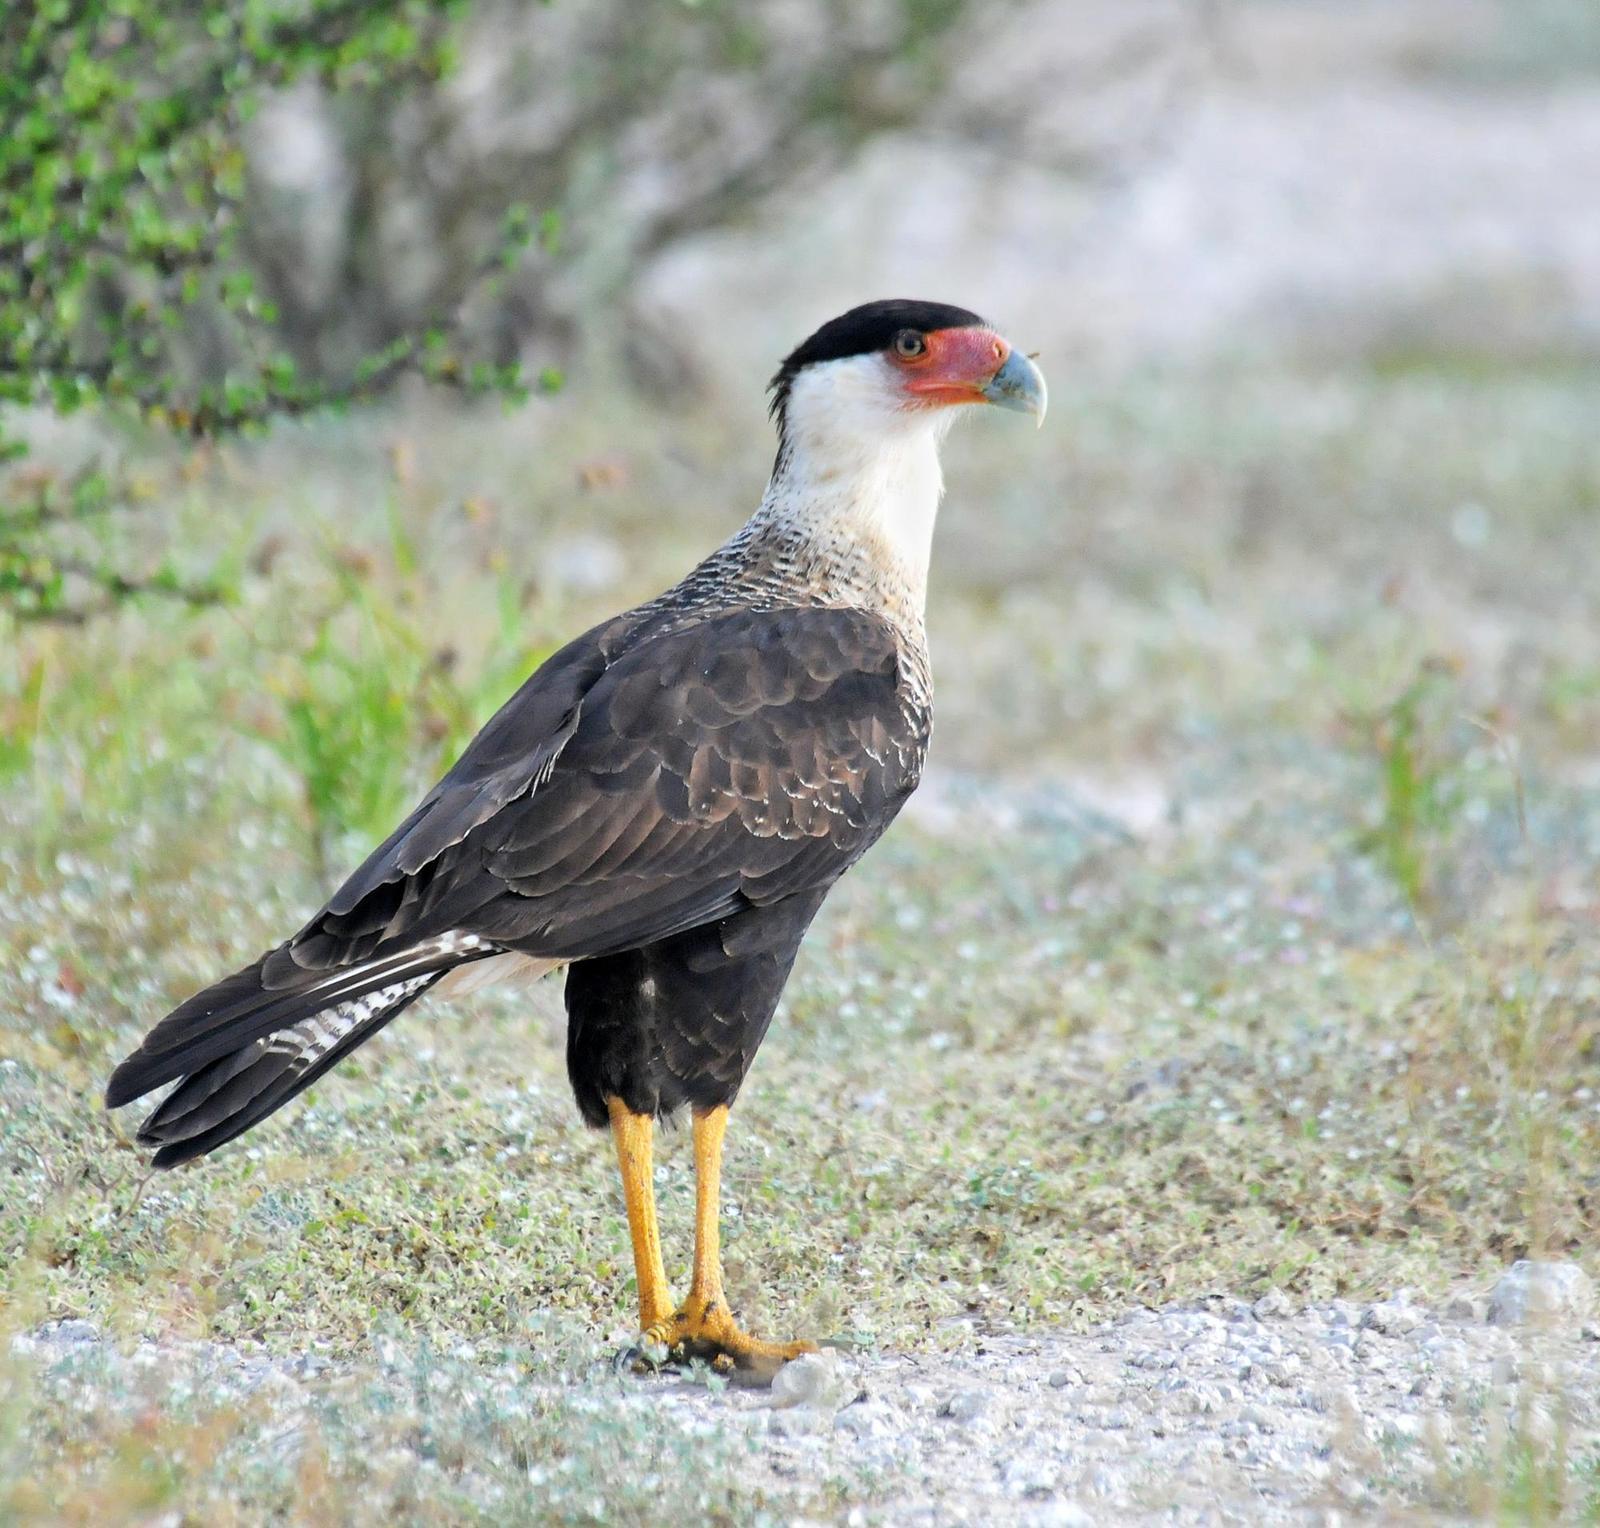 Crested Caracara Photo by Steven Mlodinow